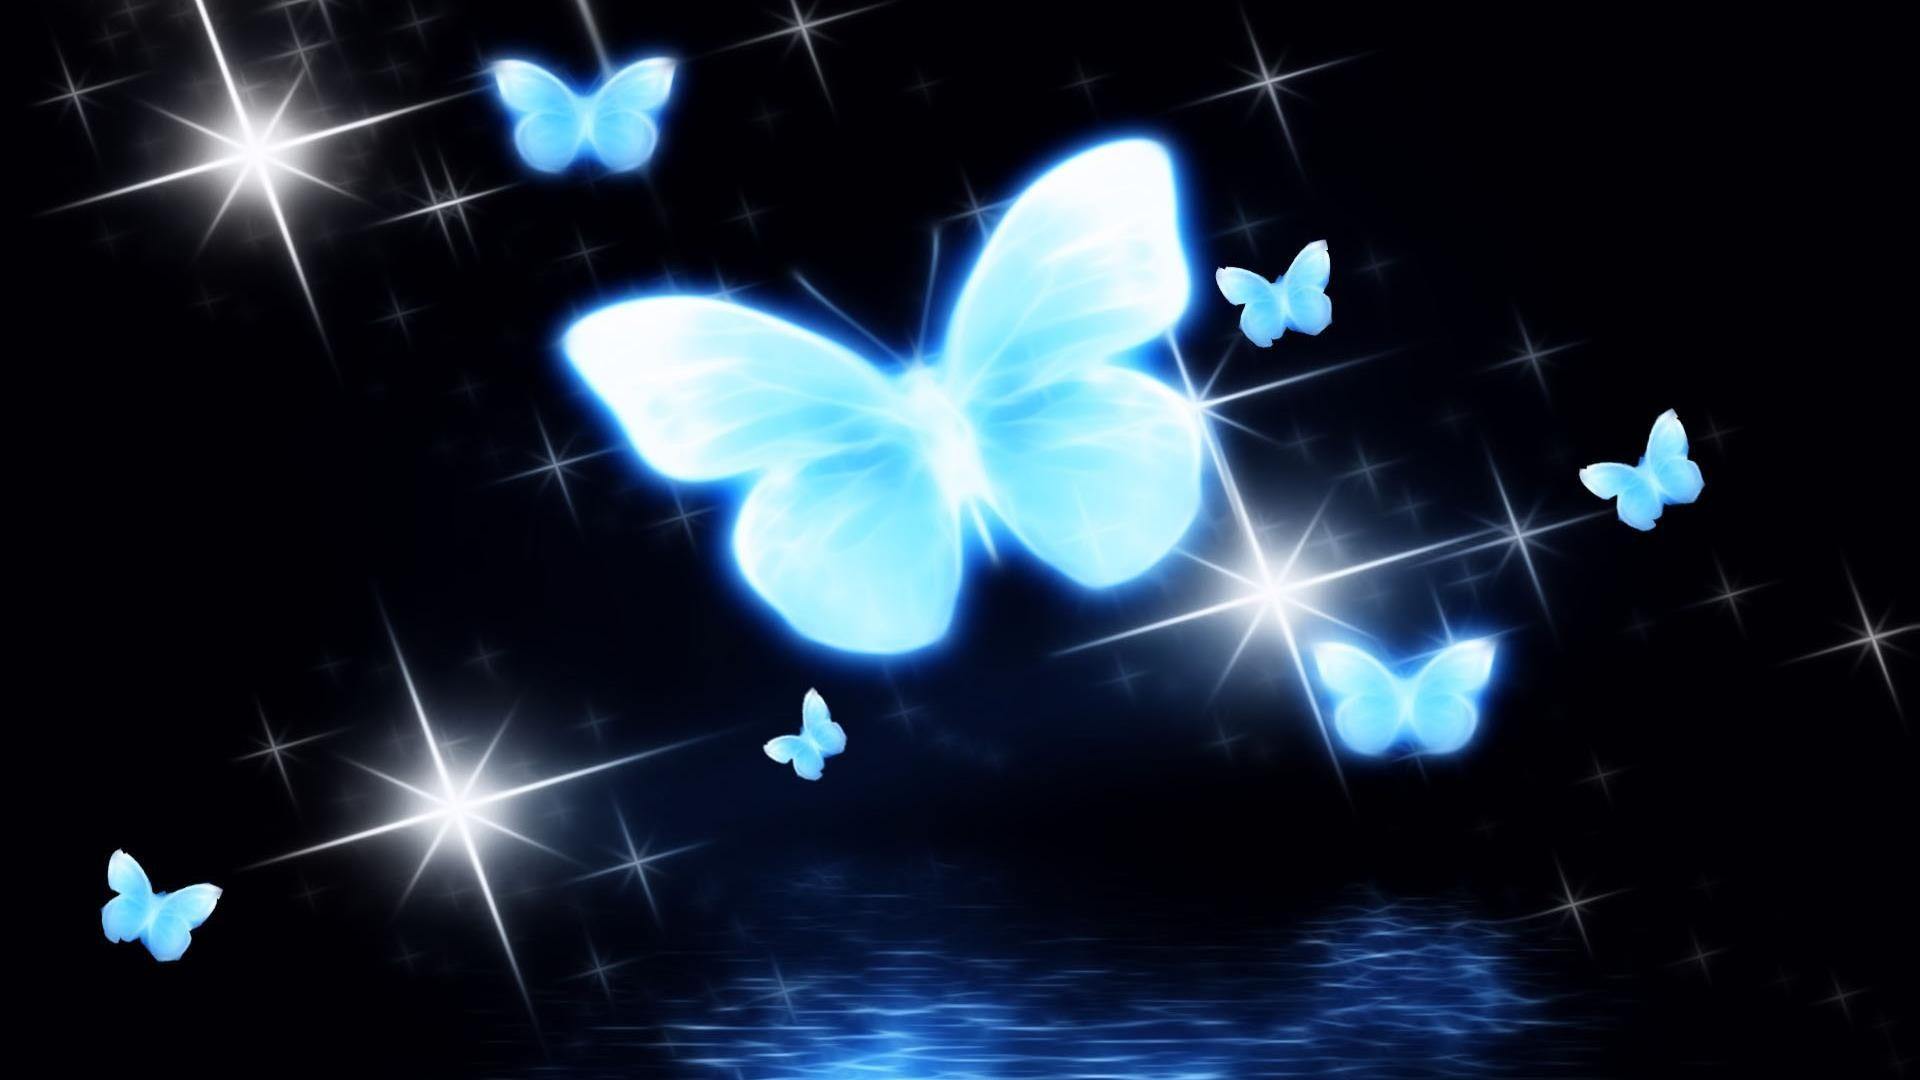 Abstract Butterfly Desktop Wallpapers Top Free Abstract Butterfly Desktop Backgrounds